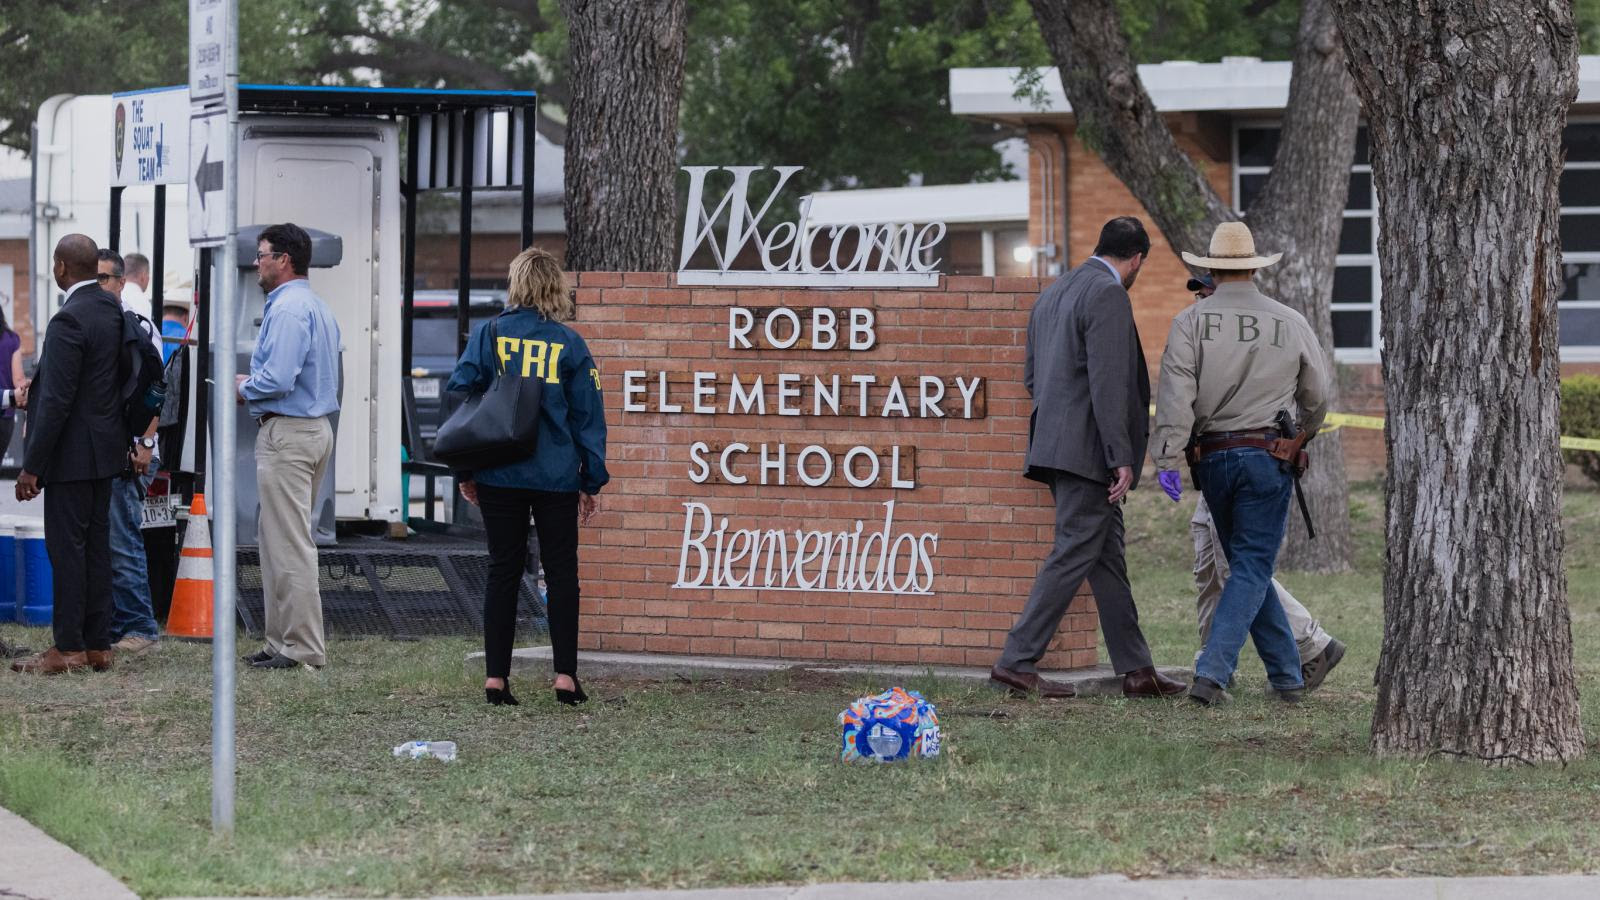  Uvalde school police chief placed on administrative leave as investigation continues  plus MORE GettyImages-1240883579